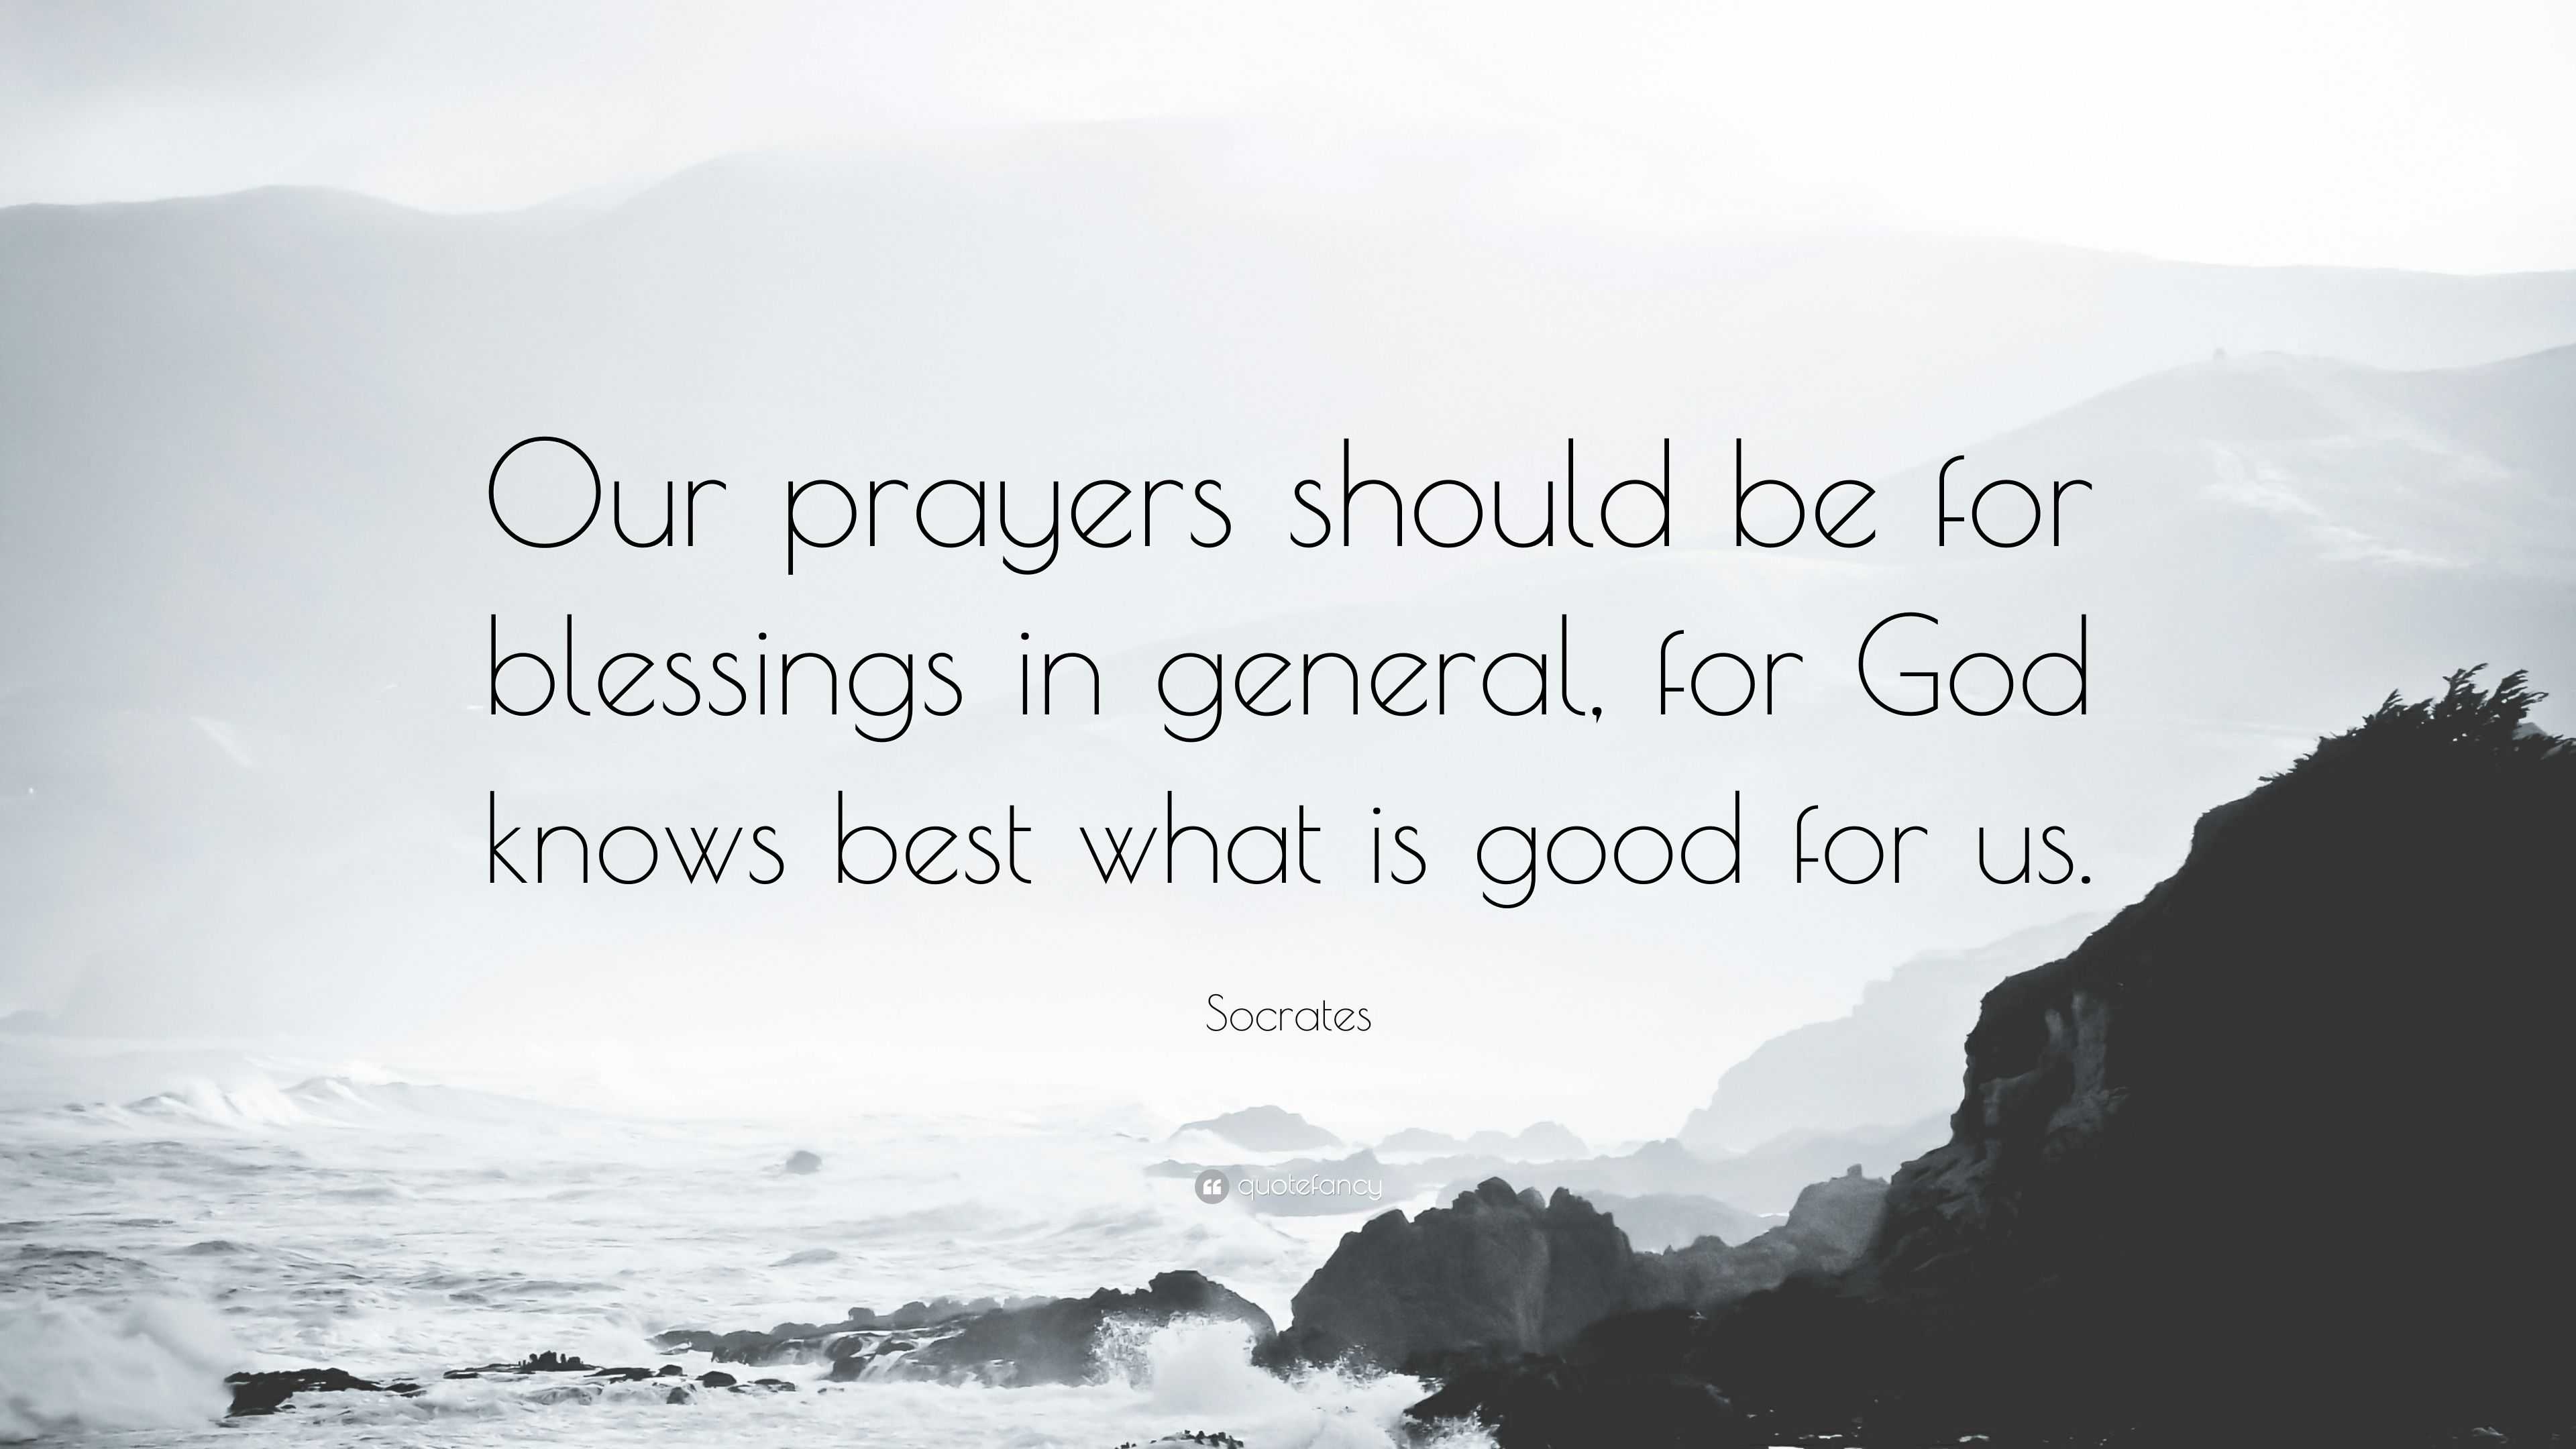 Socrates Quote: “Our prayers should be for blessings in general, for God knows best what is